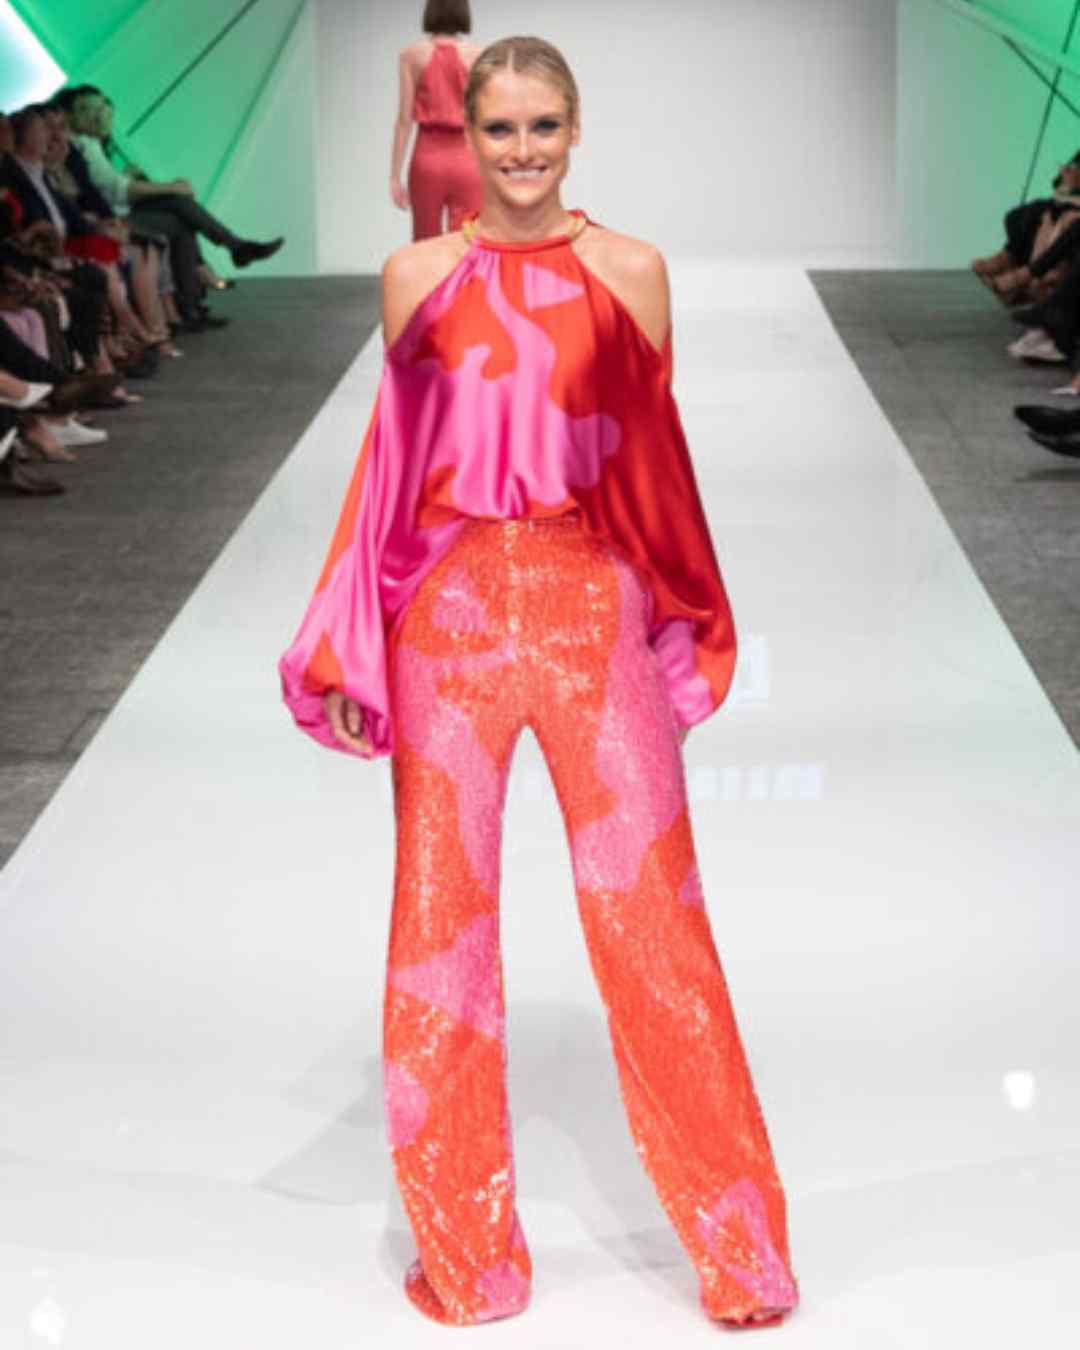 Women on runway wearing pink and organge flowing top and sequinned pants